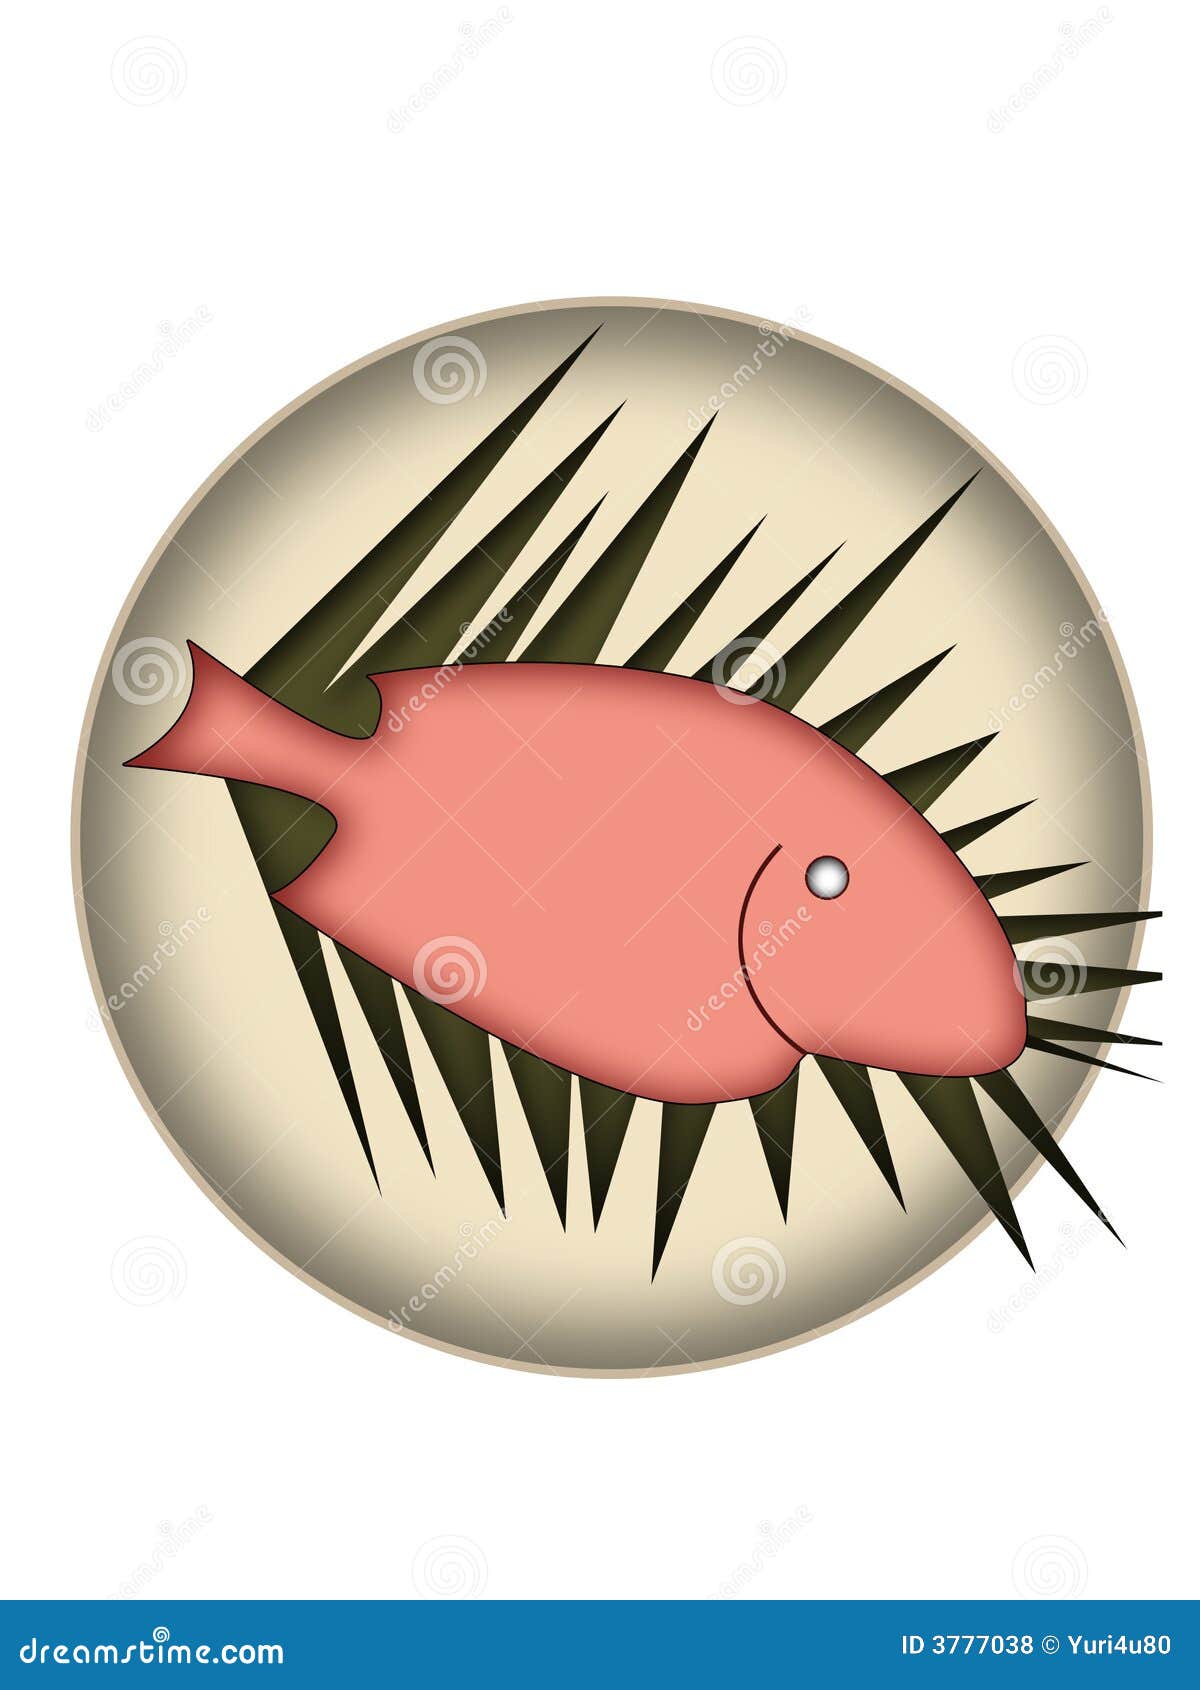 fish plate clipart - photo #42